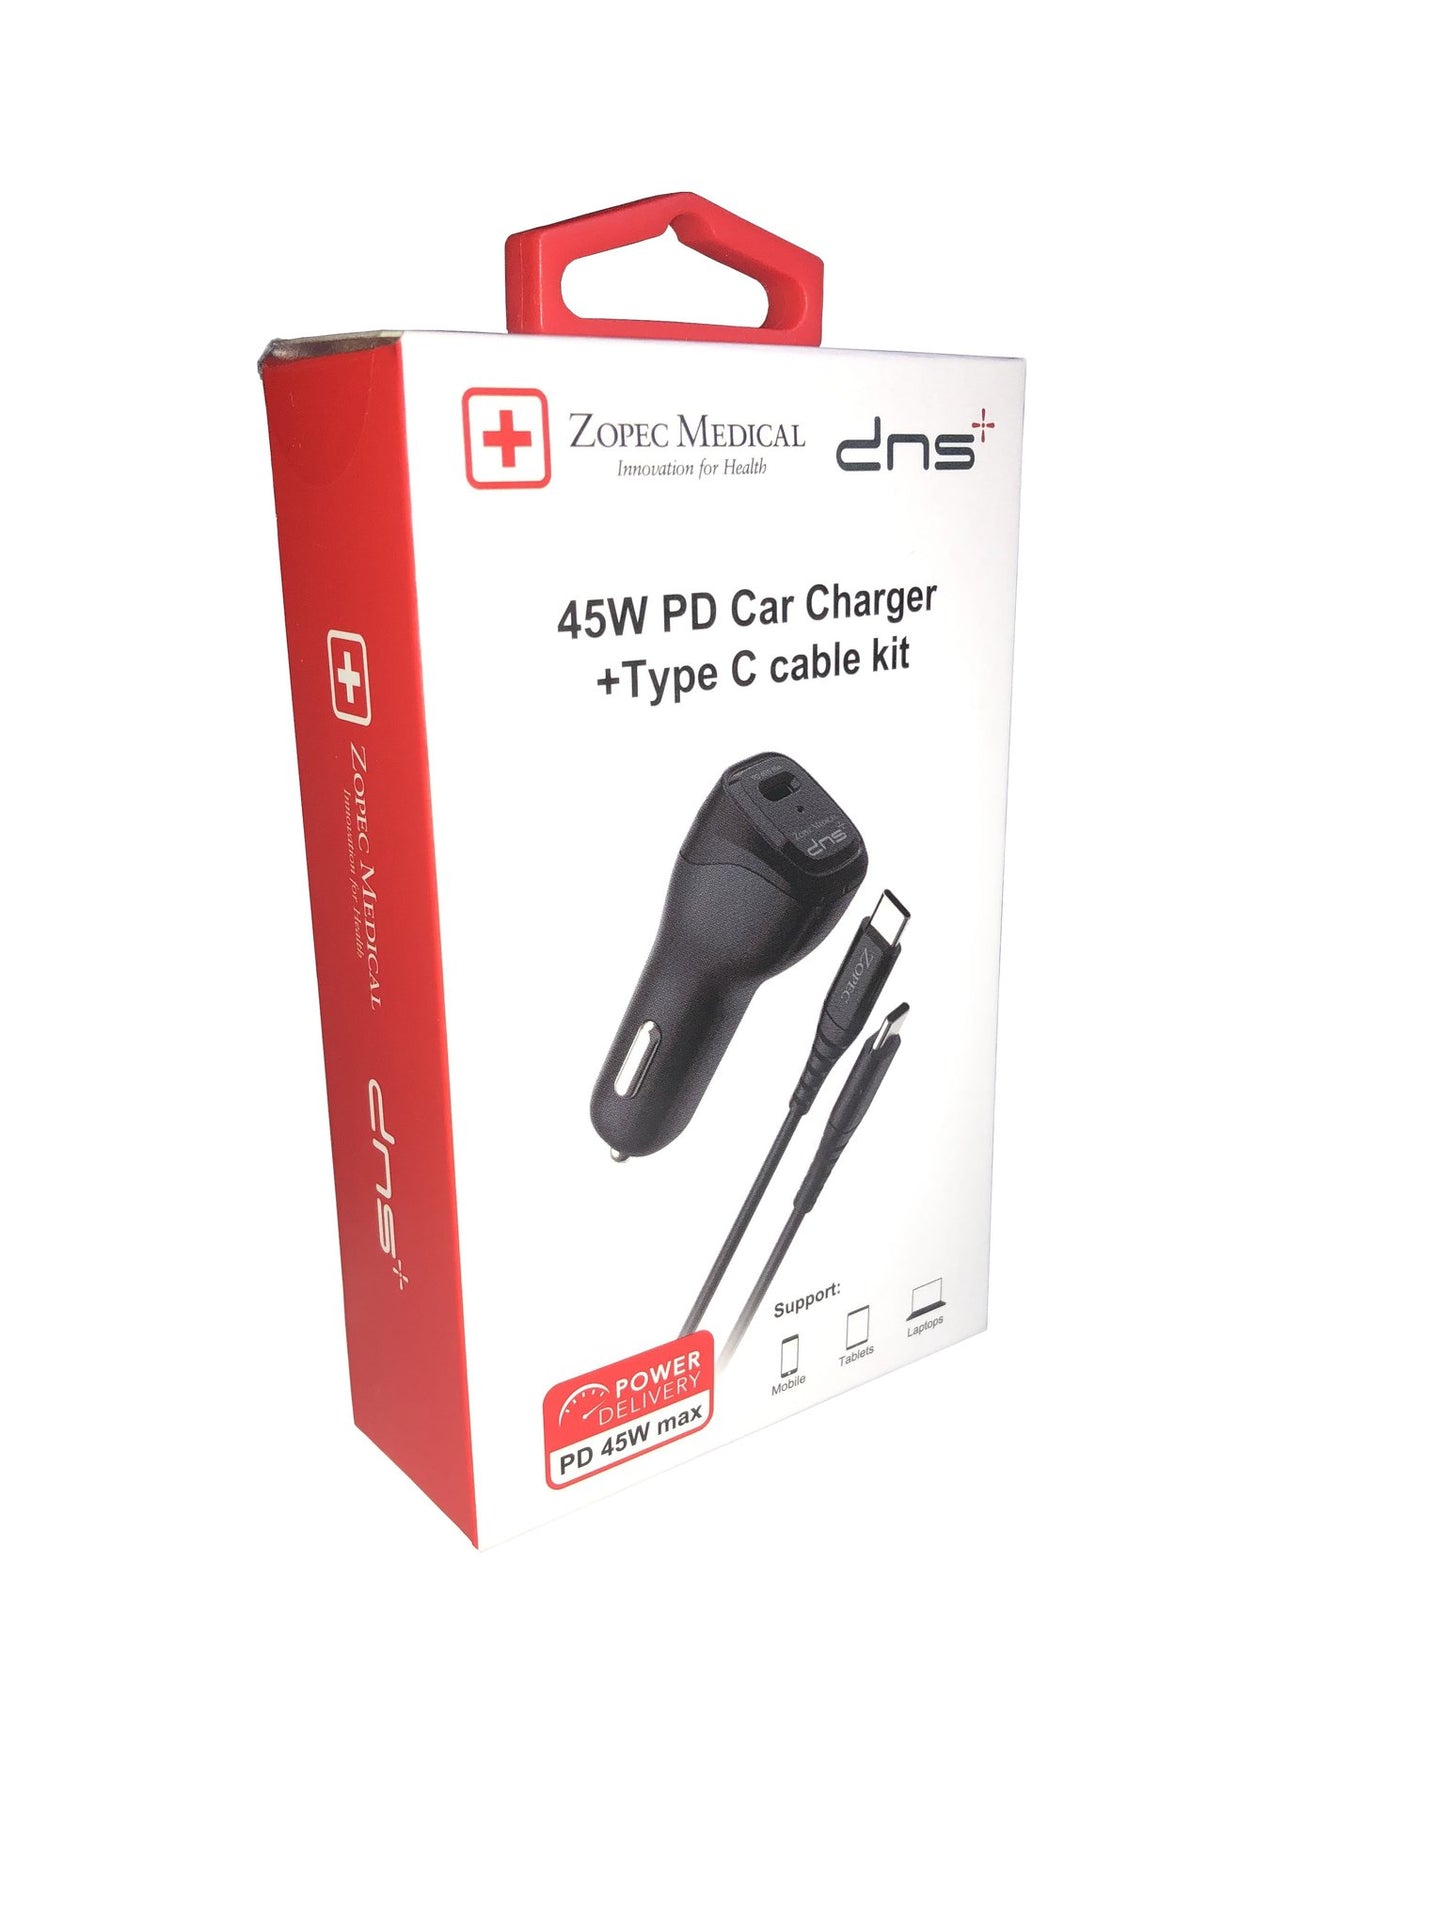 Angled view of Zopec Voyage SMart Car Charger in box